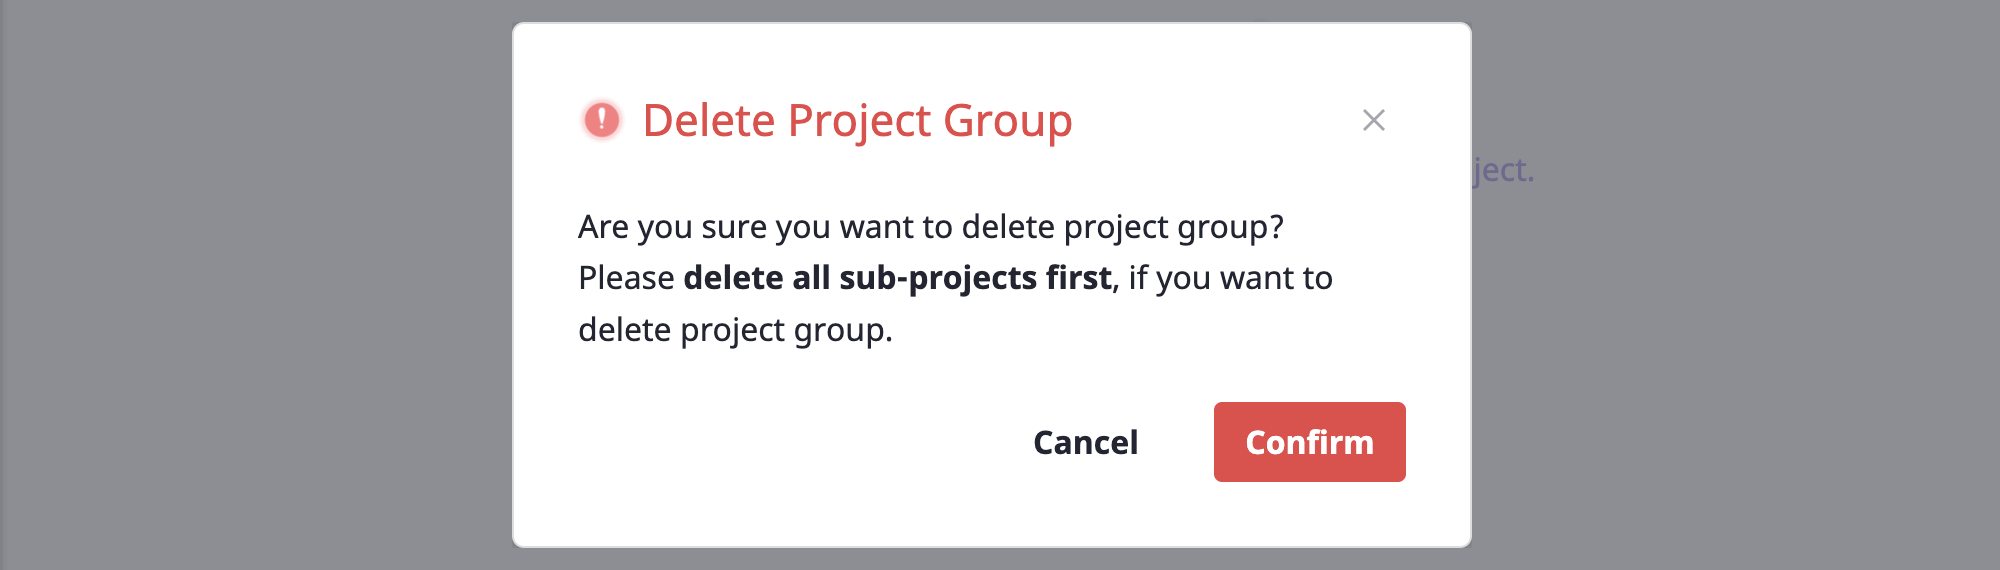 project-group-delete-modal